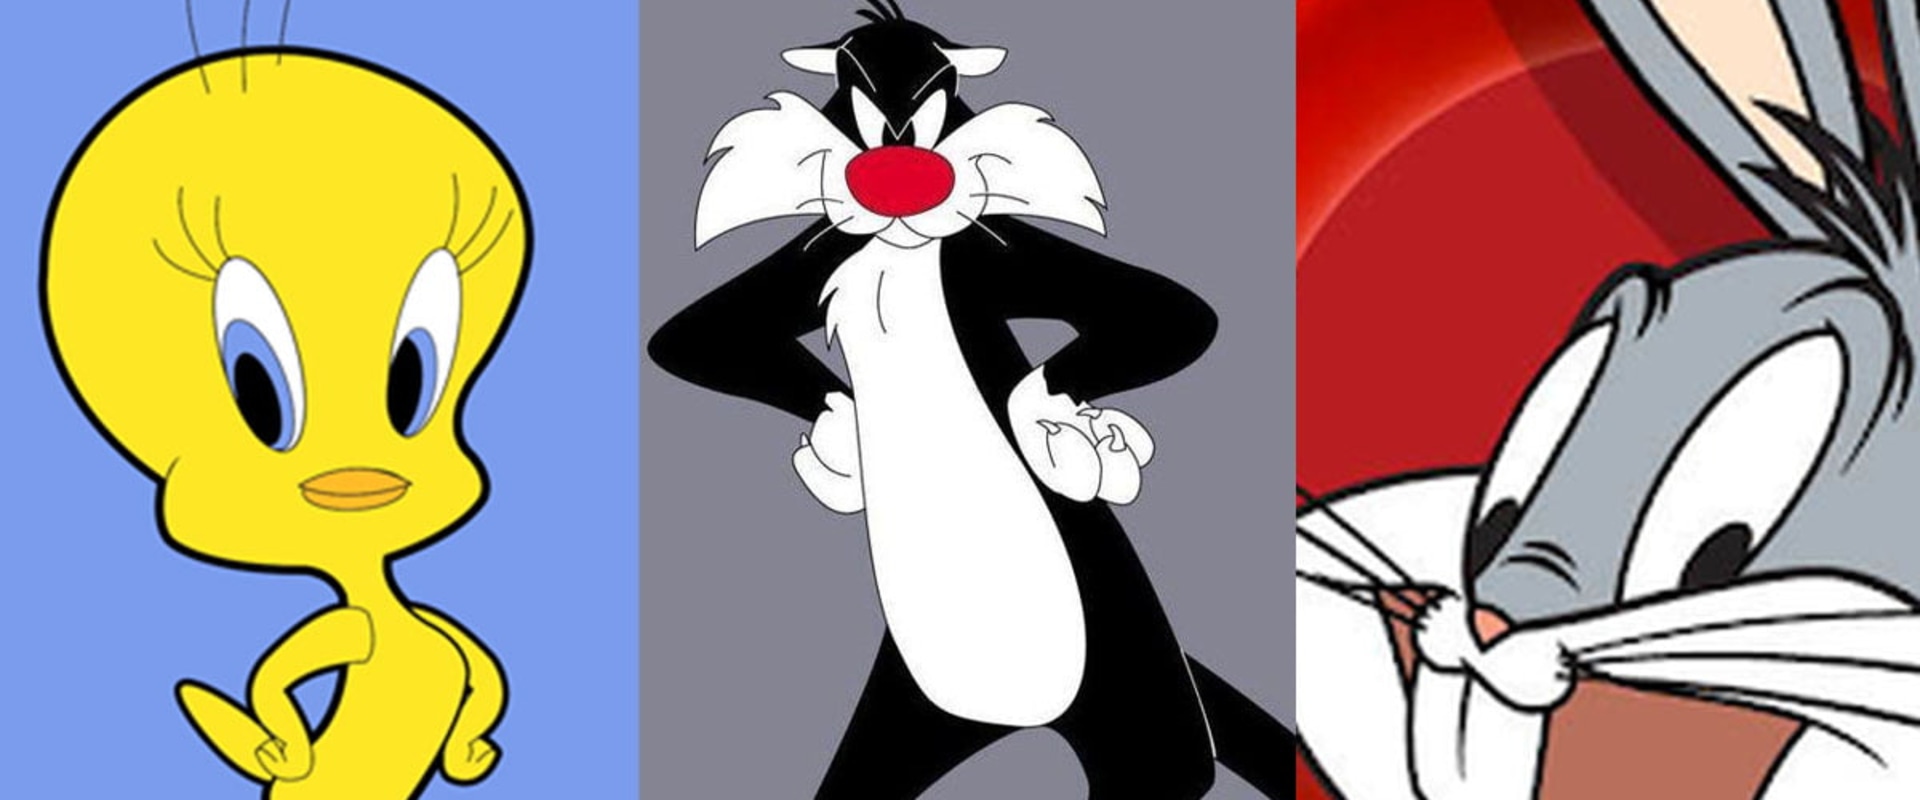 The Most Popular Cartoons of All Time